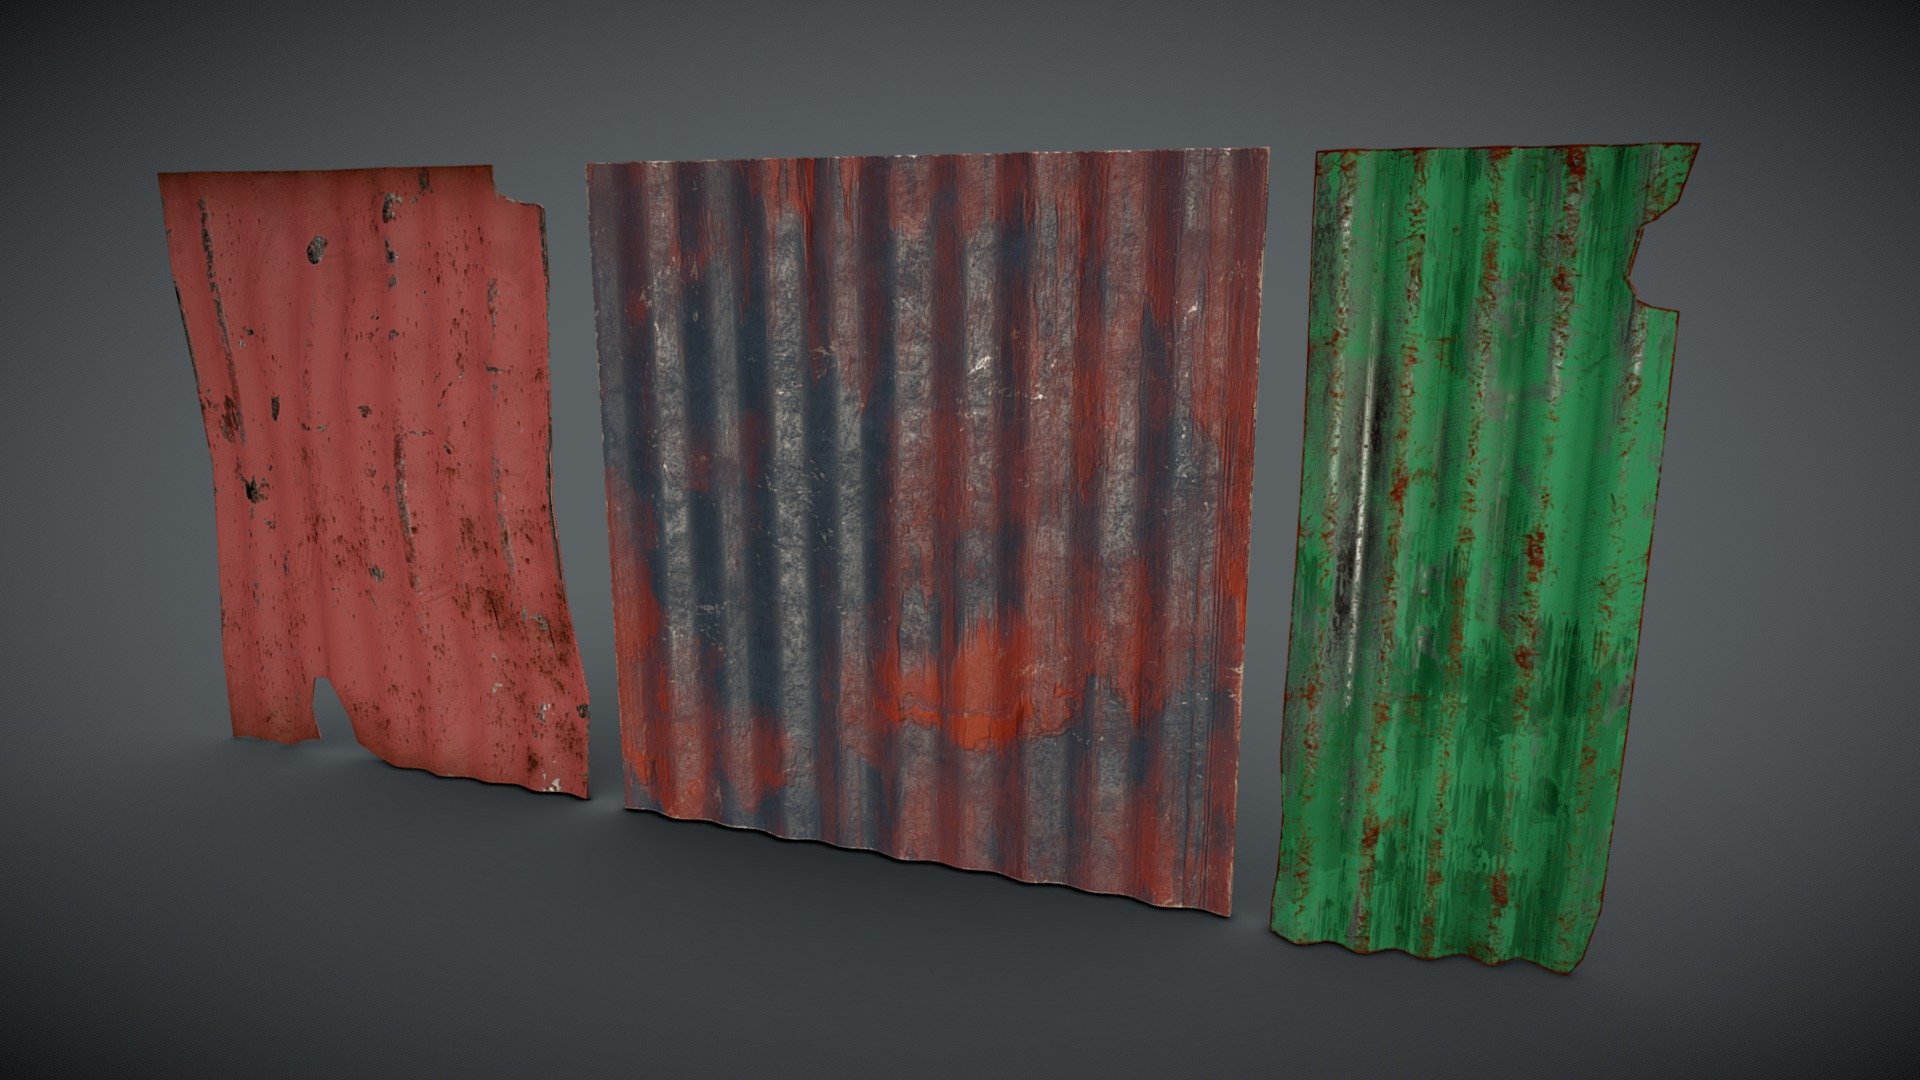 Simple corrugated sheets.  Useful to scatter around some sort of apocalyptic/run down enviroment. 

2k PBR textures.  Amy requests let me know 3d model